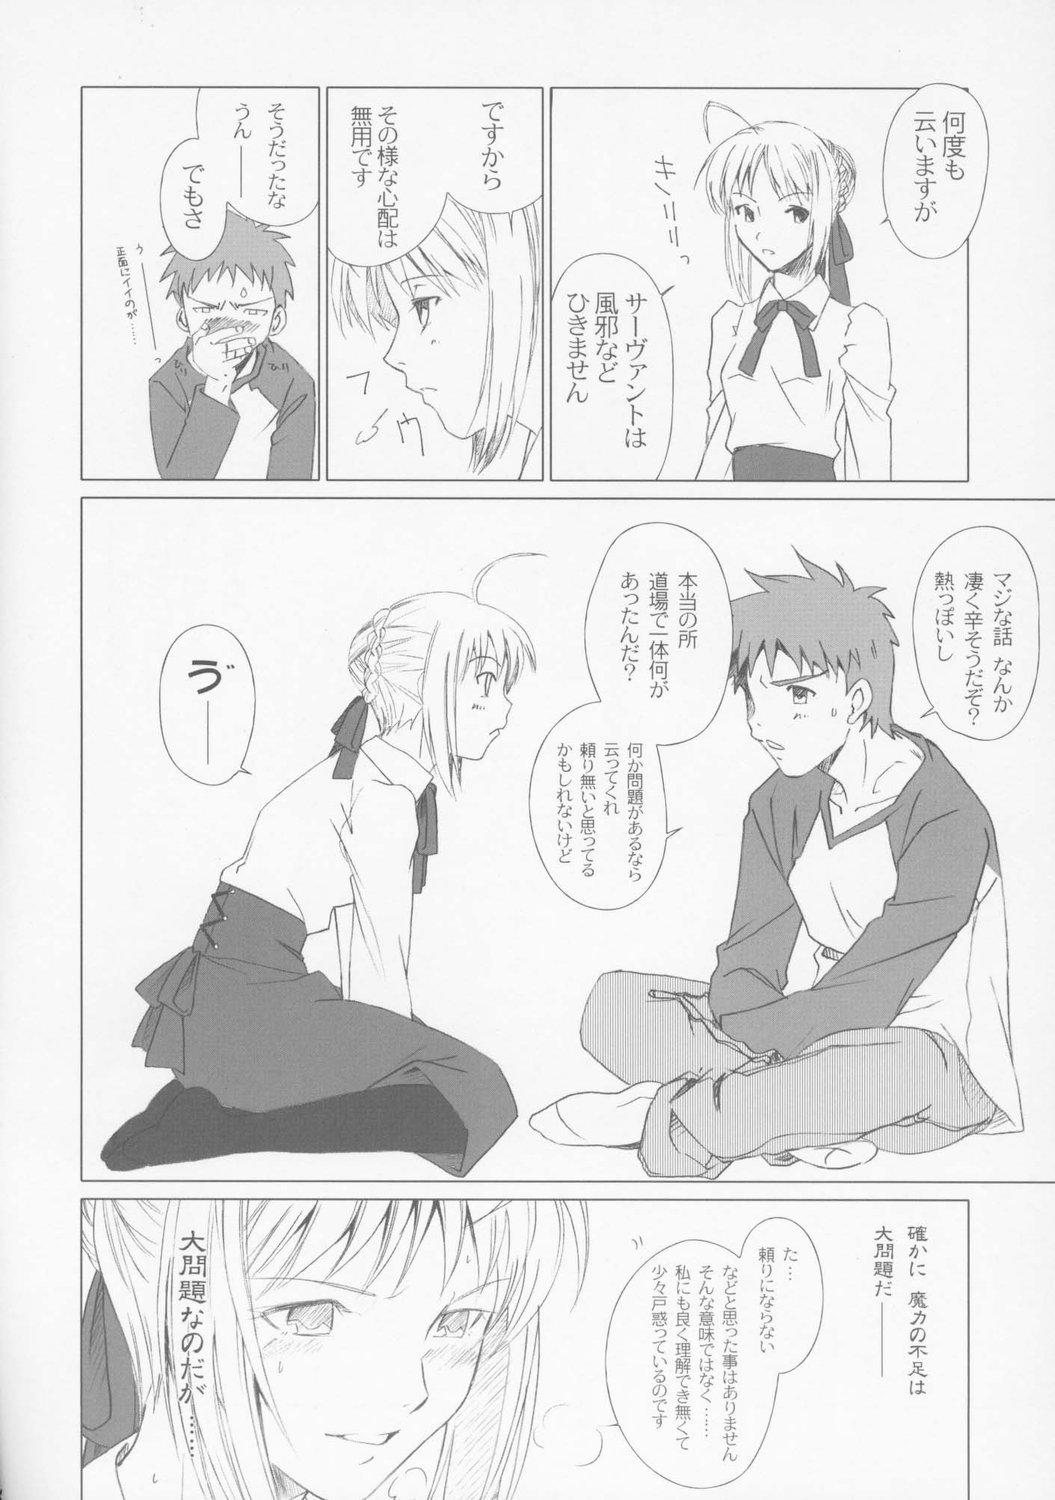 Tiny Titties Eien no Uta - Ever Song - Fate stay night Fate hollow ataraxia Step Fantasy - Page 10